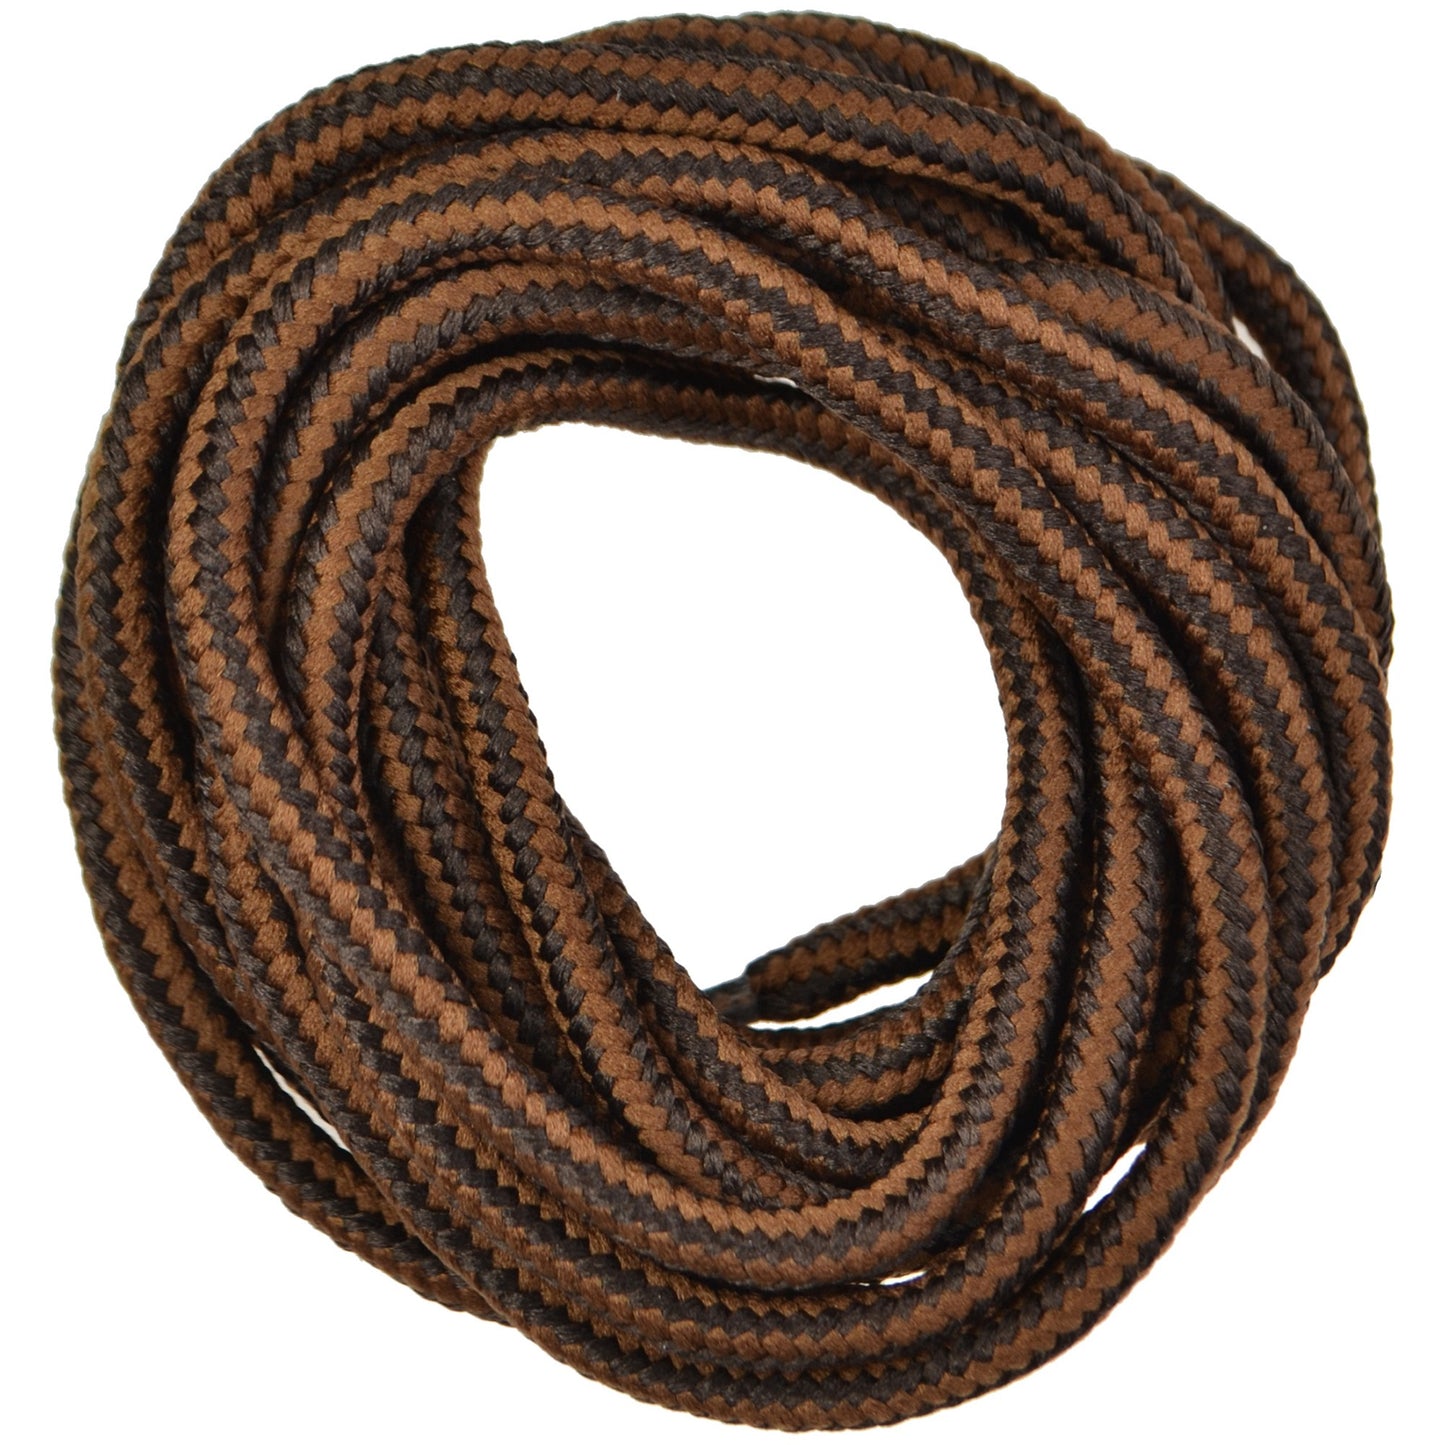 150cm Worksite Cord Work Boot Shoe Laces - Brown